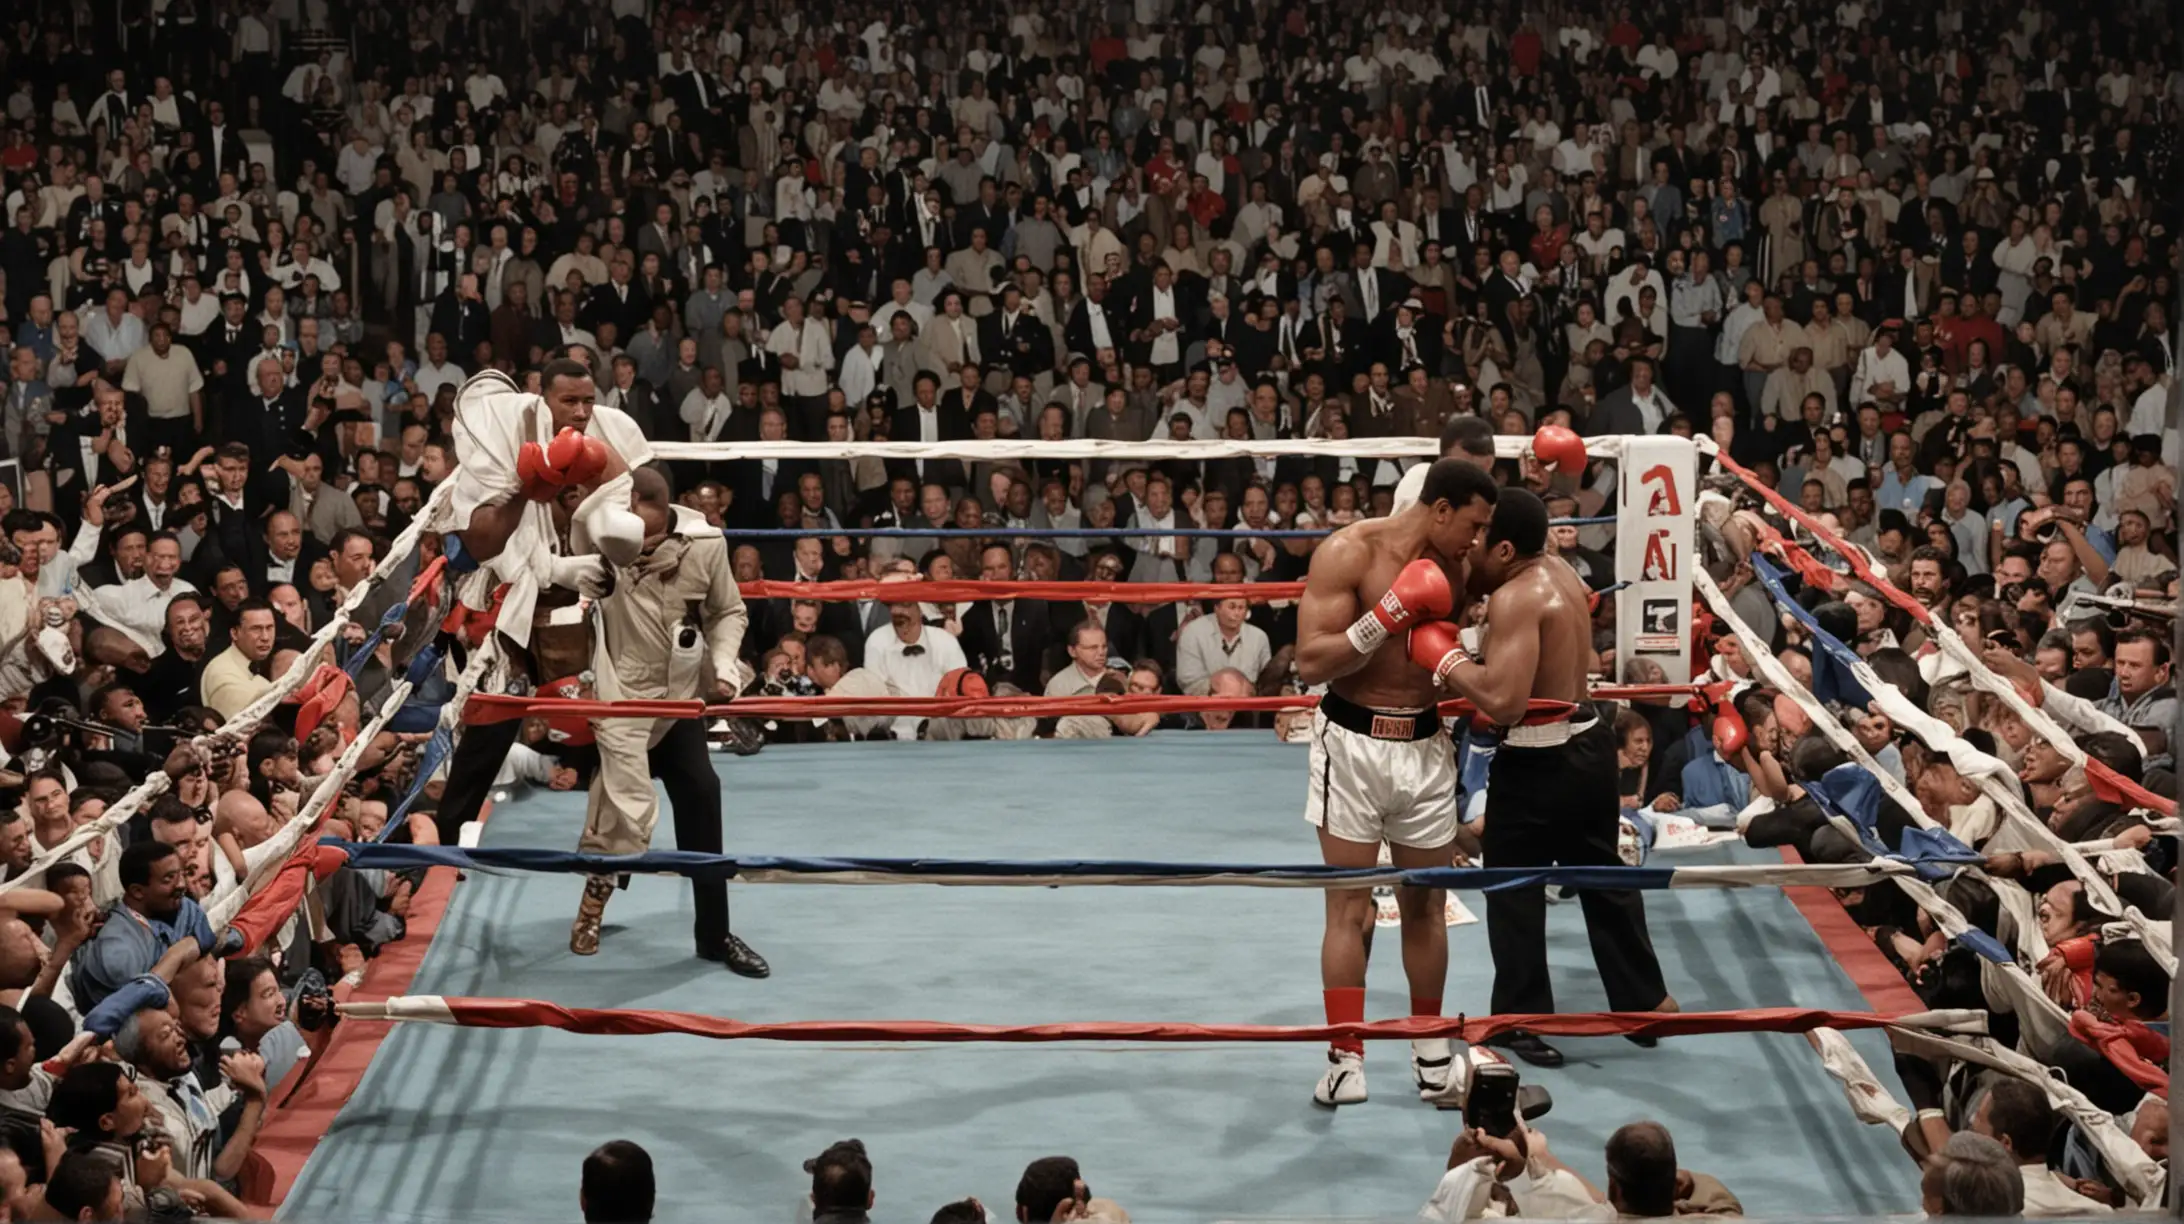 Visualization Prompt: Create an image of Muhammad Ali during the "Thrilla in Manila" fight against Joe Frazier.
Image Description: Muhammad Ali and Joe Frazier are locked in a fierce exchange of punches during the "Thrilla in Manila." Both fighters are visibly exhausted but determined. The crowd is on its feet, witnessing one of the greatest boxing matches of all time.